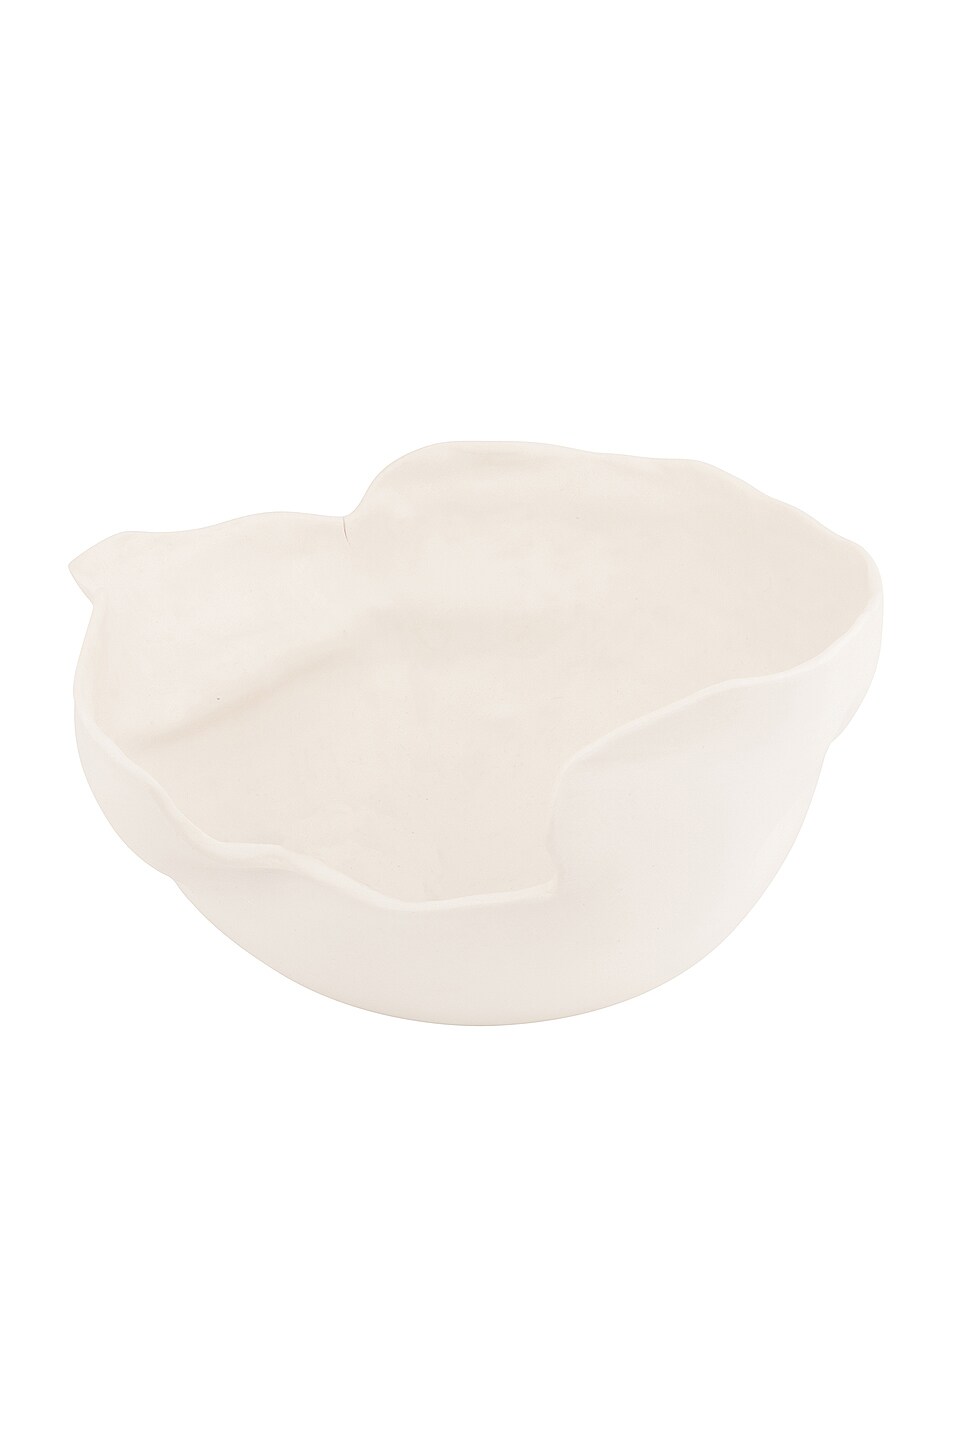 Image 1 of Completedworks Fruit Bowl in White